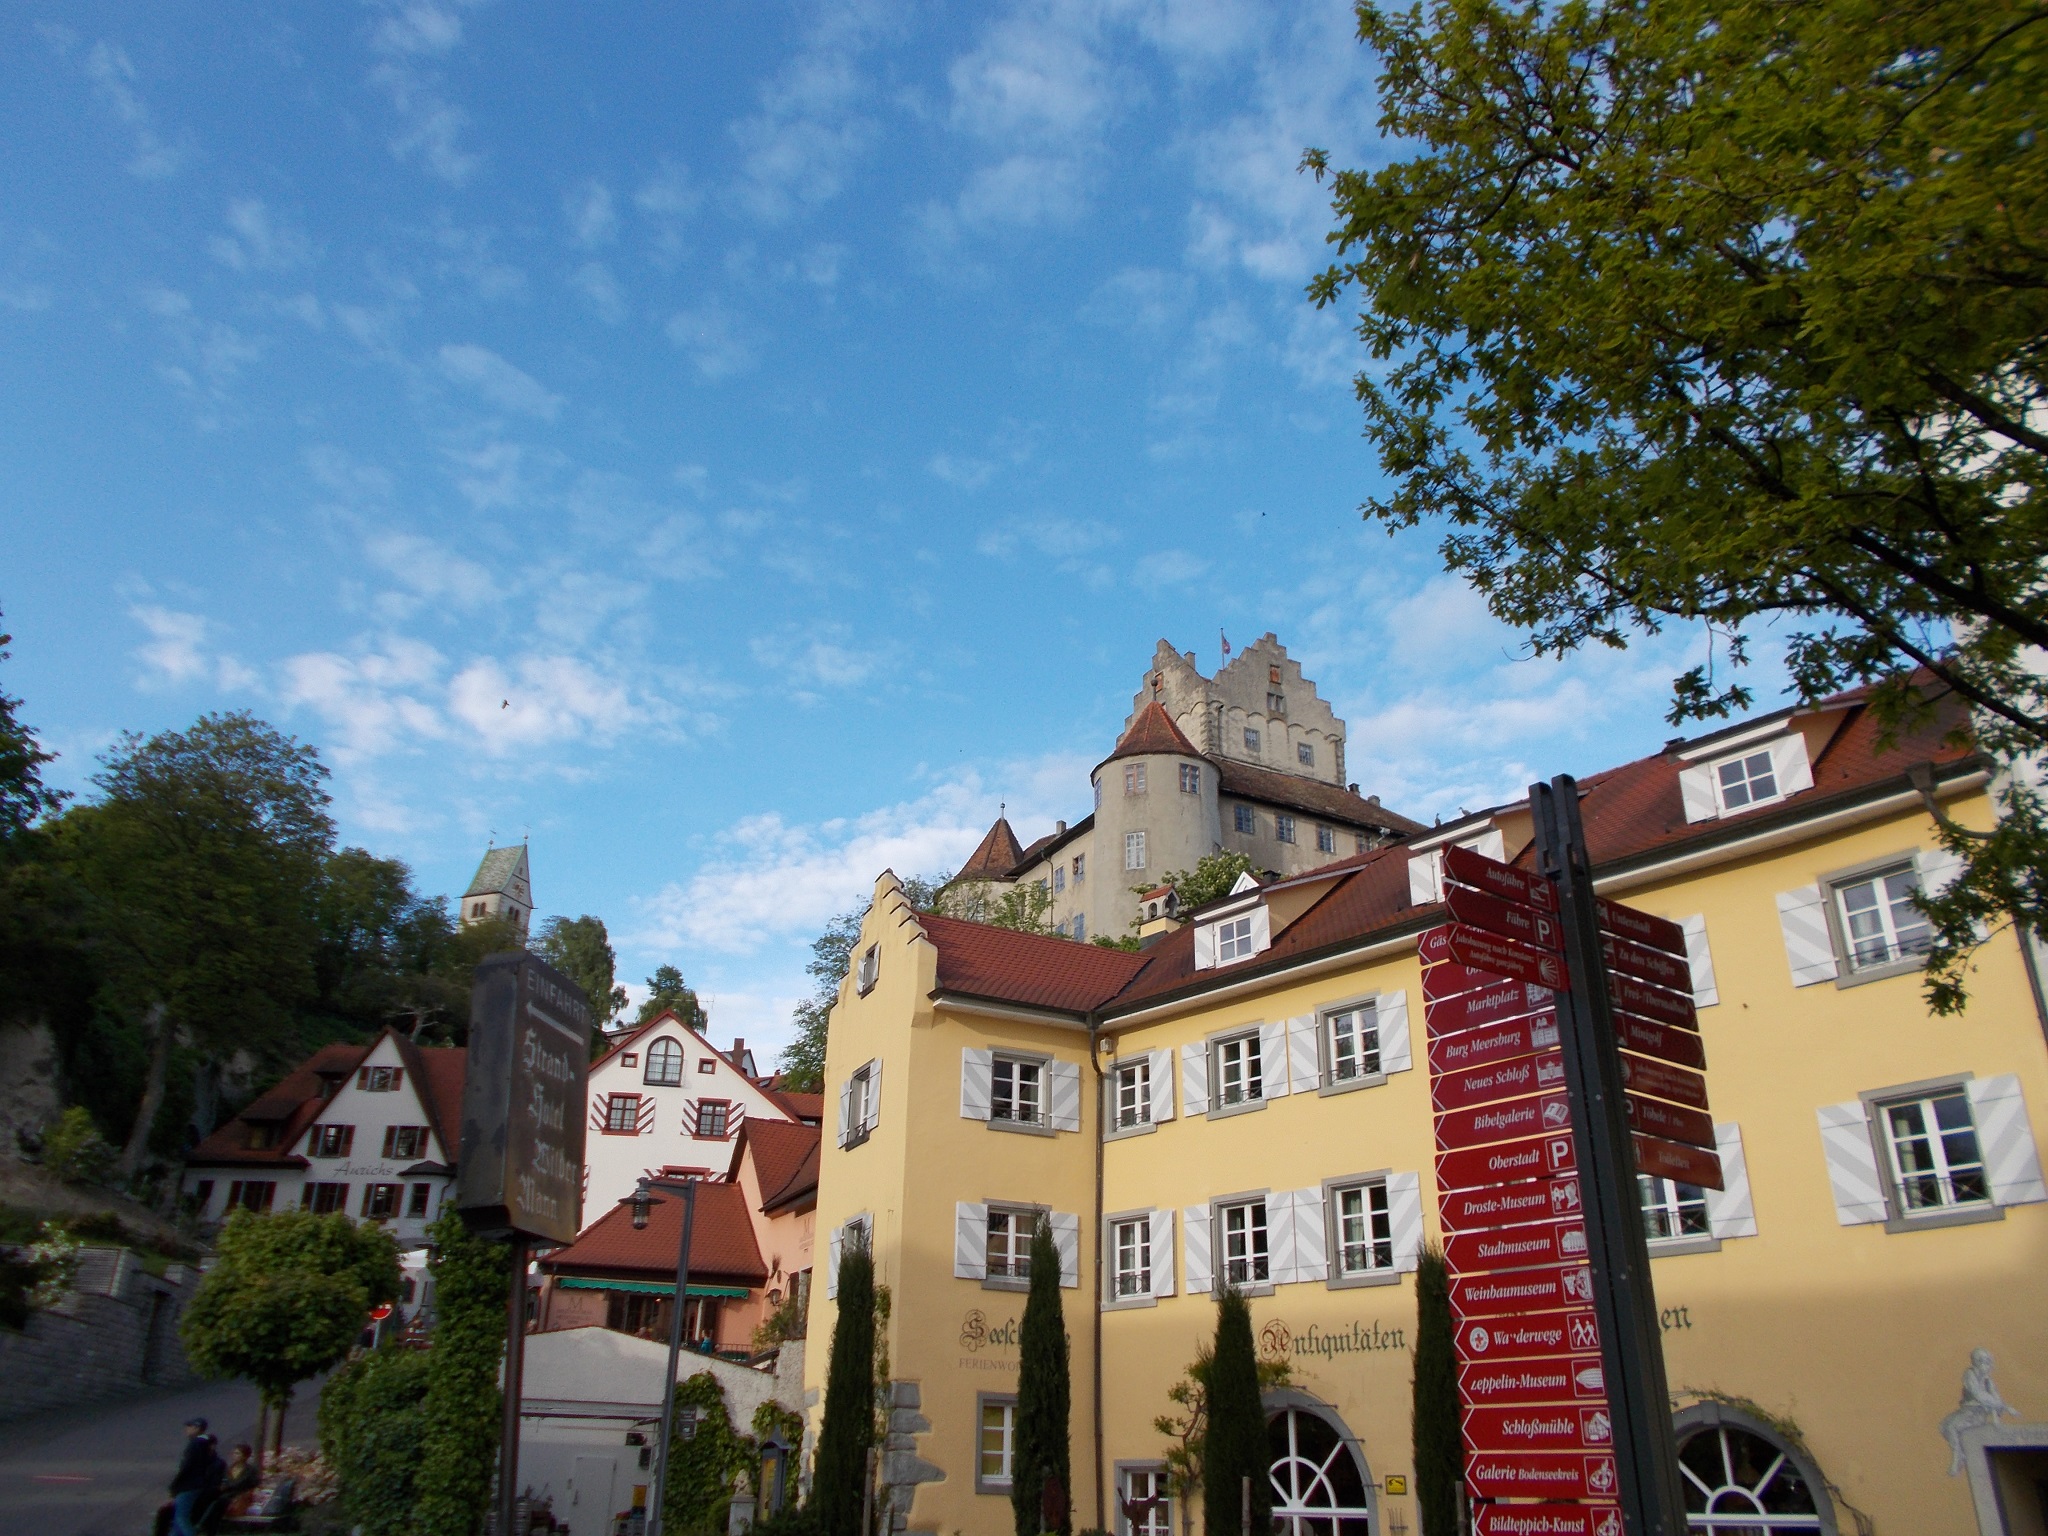 Colorful buildings with a large castle in the background in Meersburg, Germany.